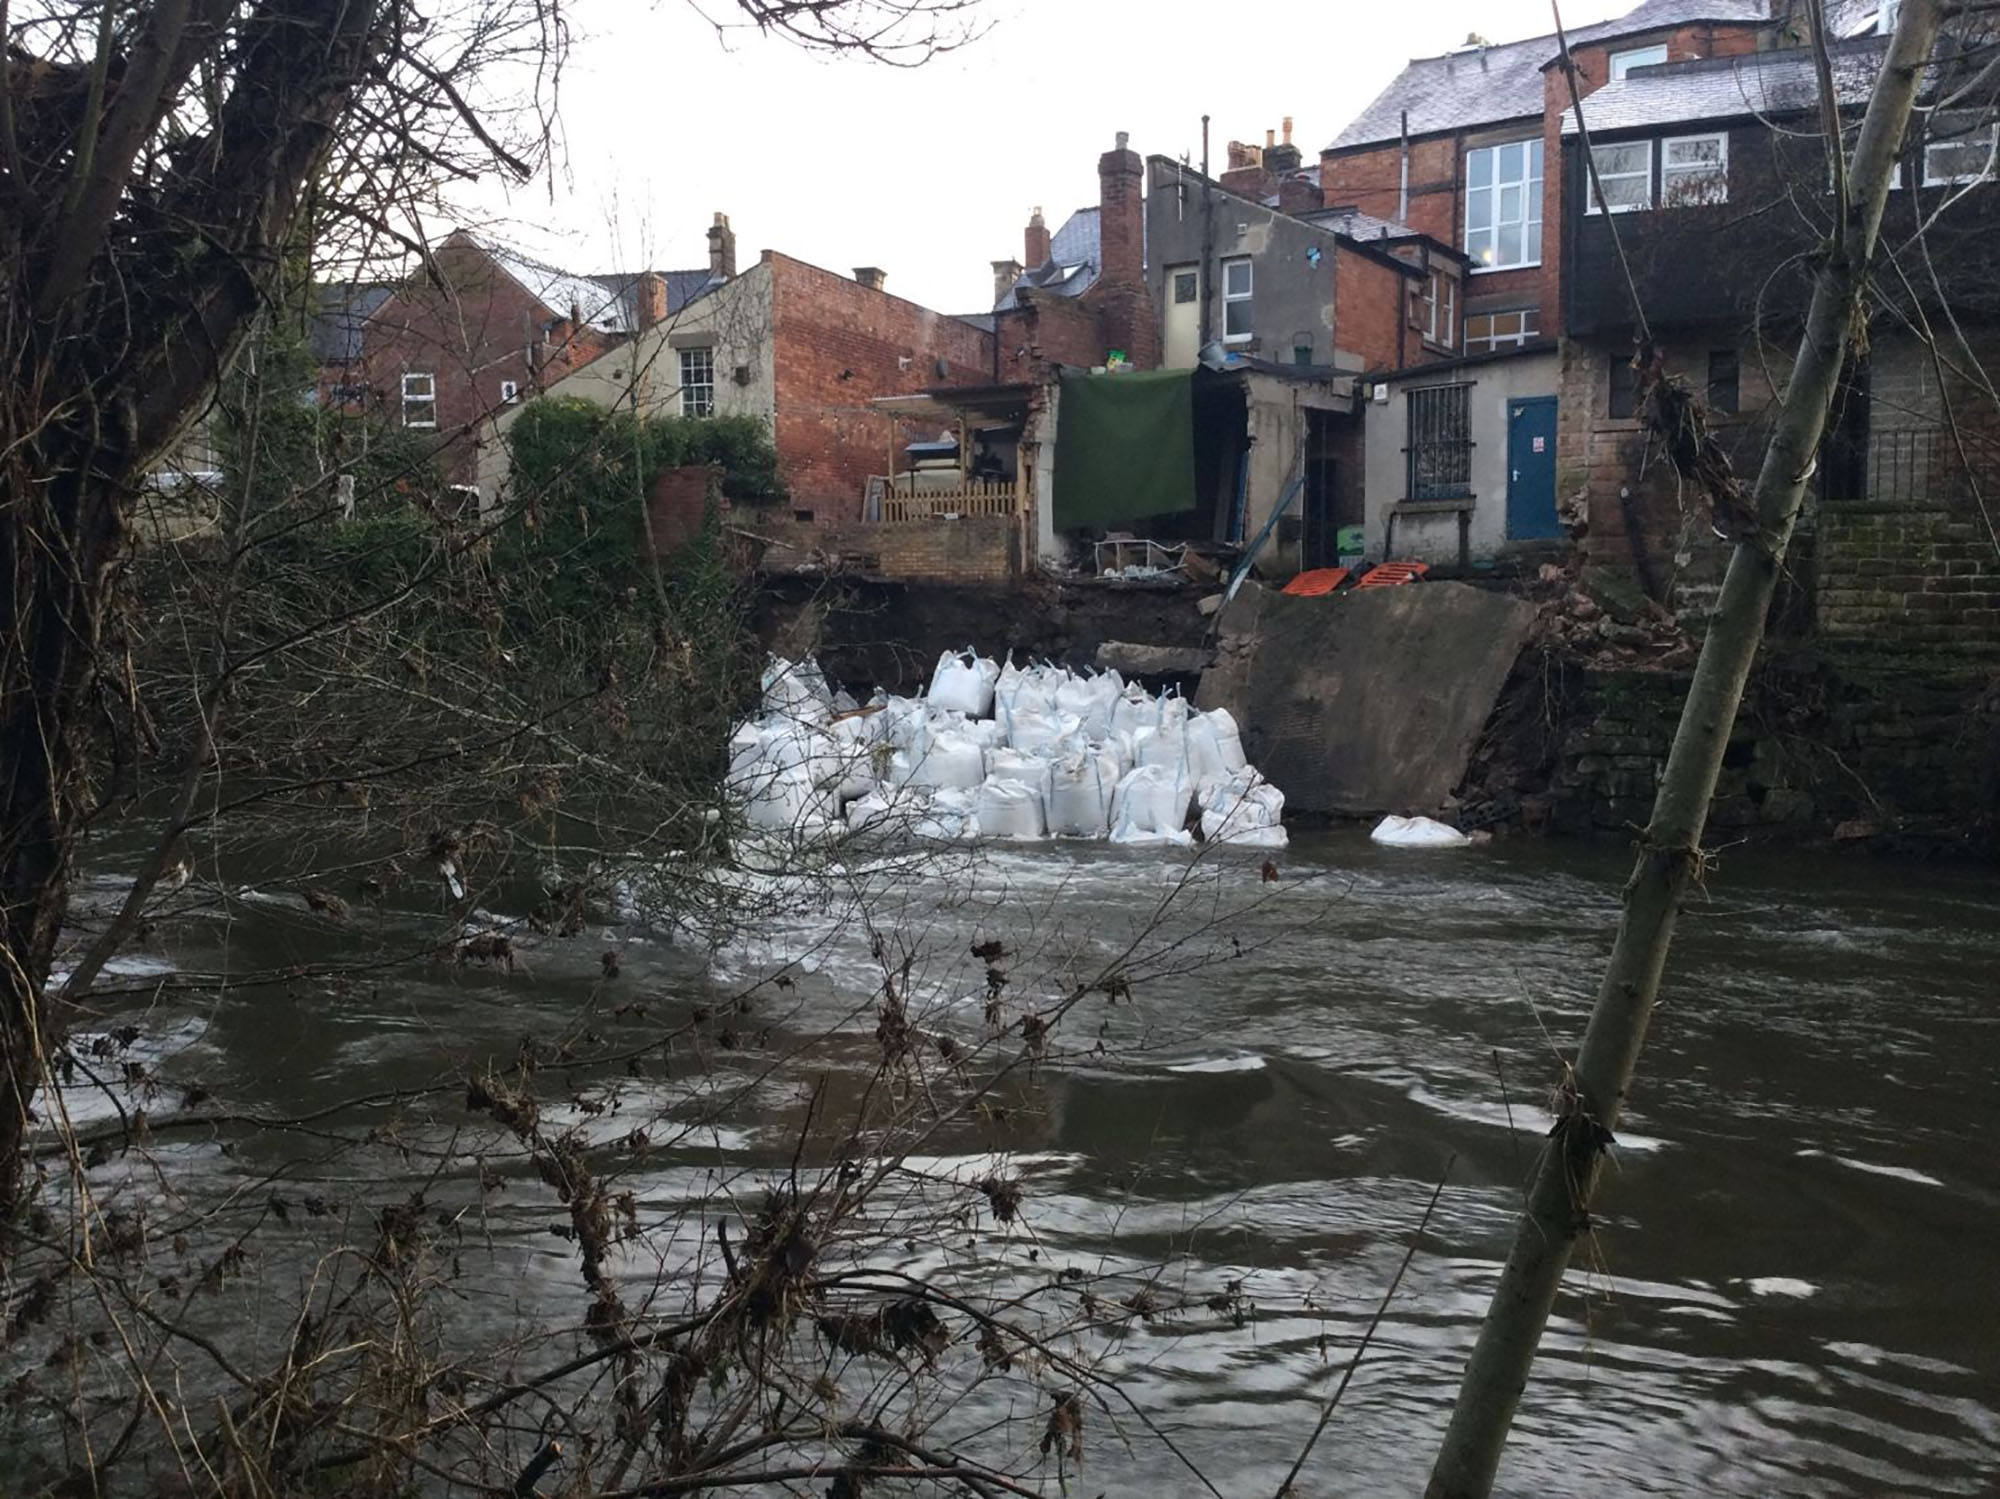 Team acts quickly to protect riverside properties